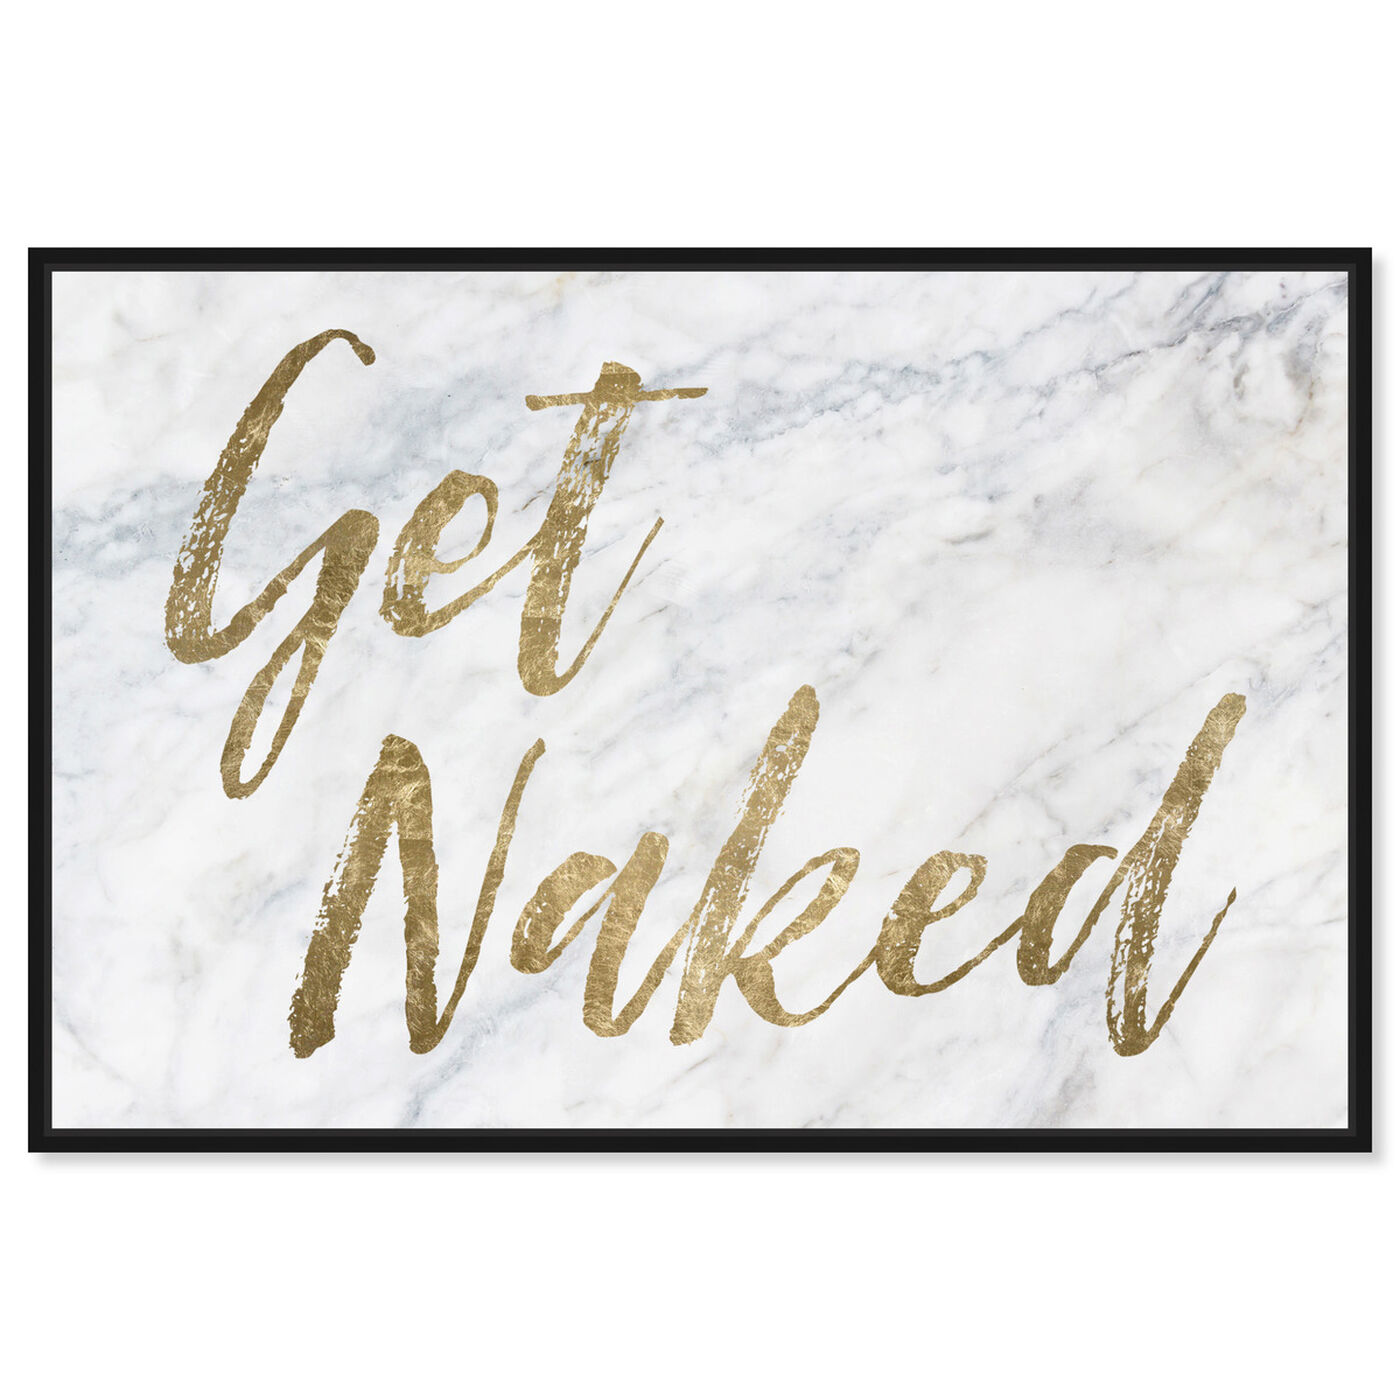 Front view of Get Naked - Bathroom featuring typography and quotes and funny quotes and sayings art.